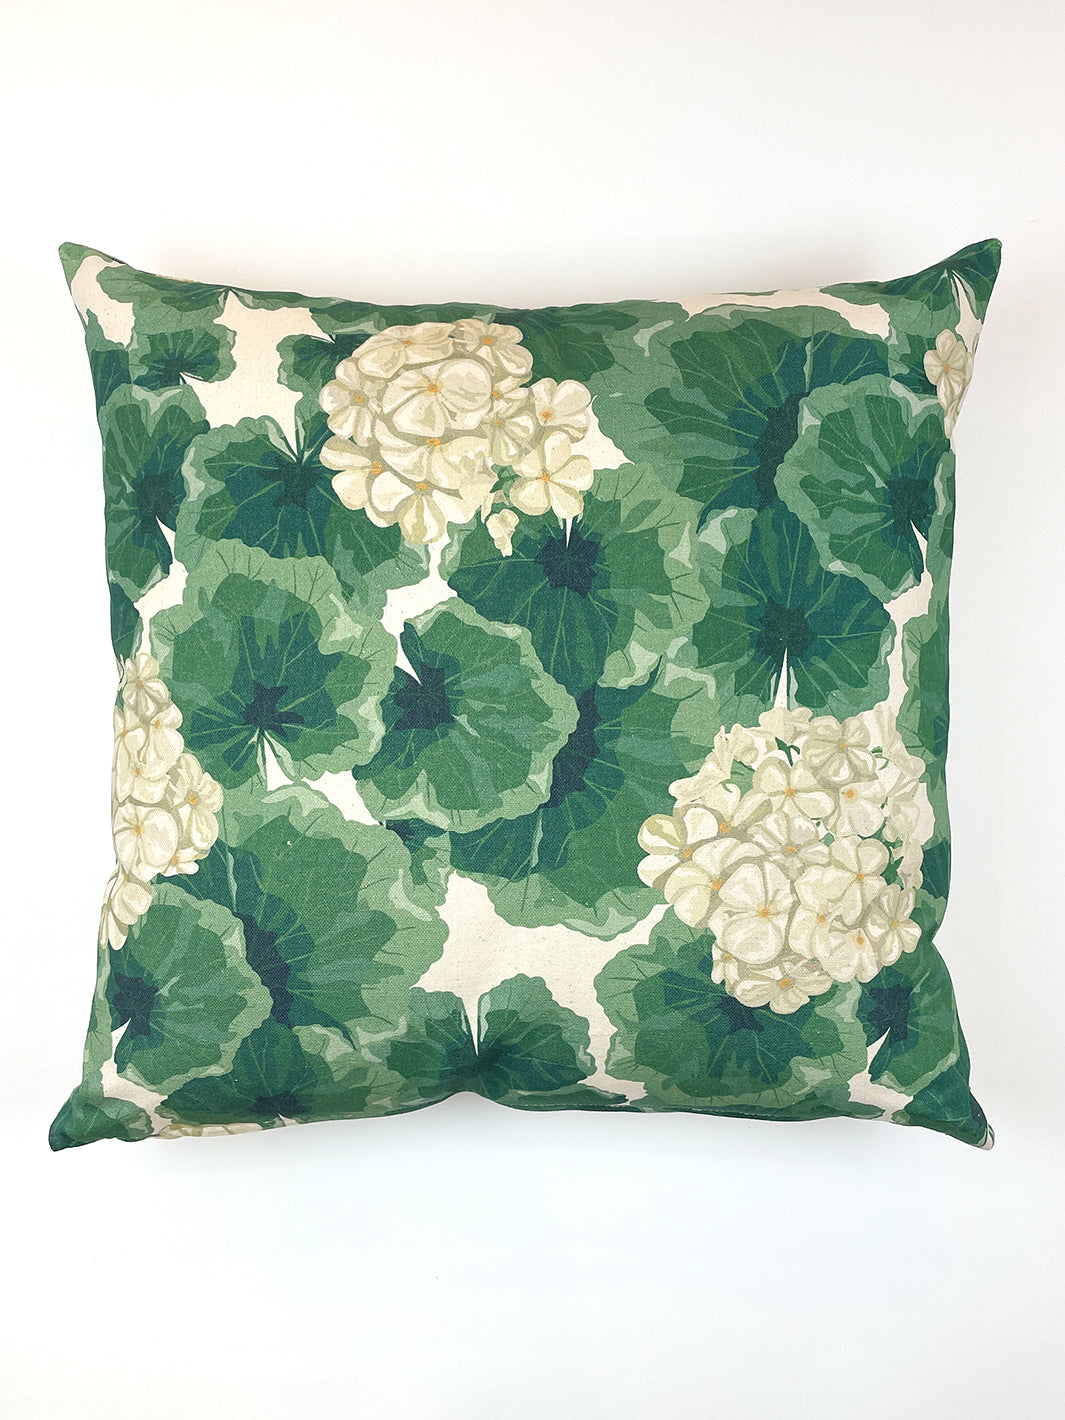 'Geranium' Throw Pillow by Nathan Turner - Natural on Raw Canvas